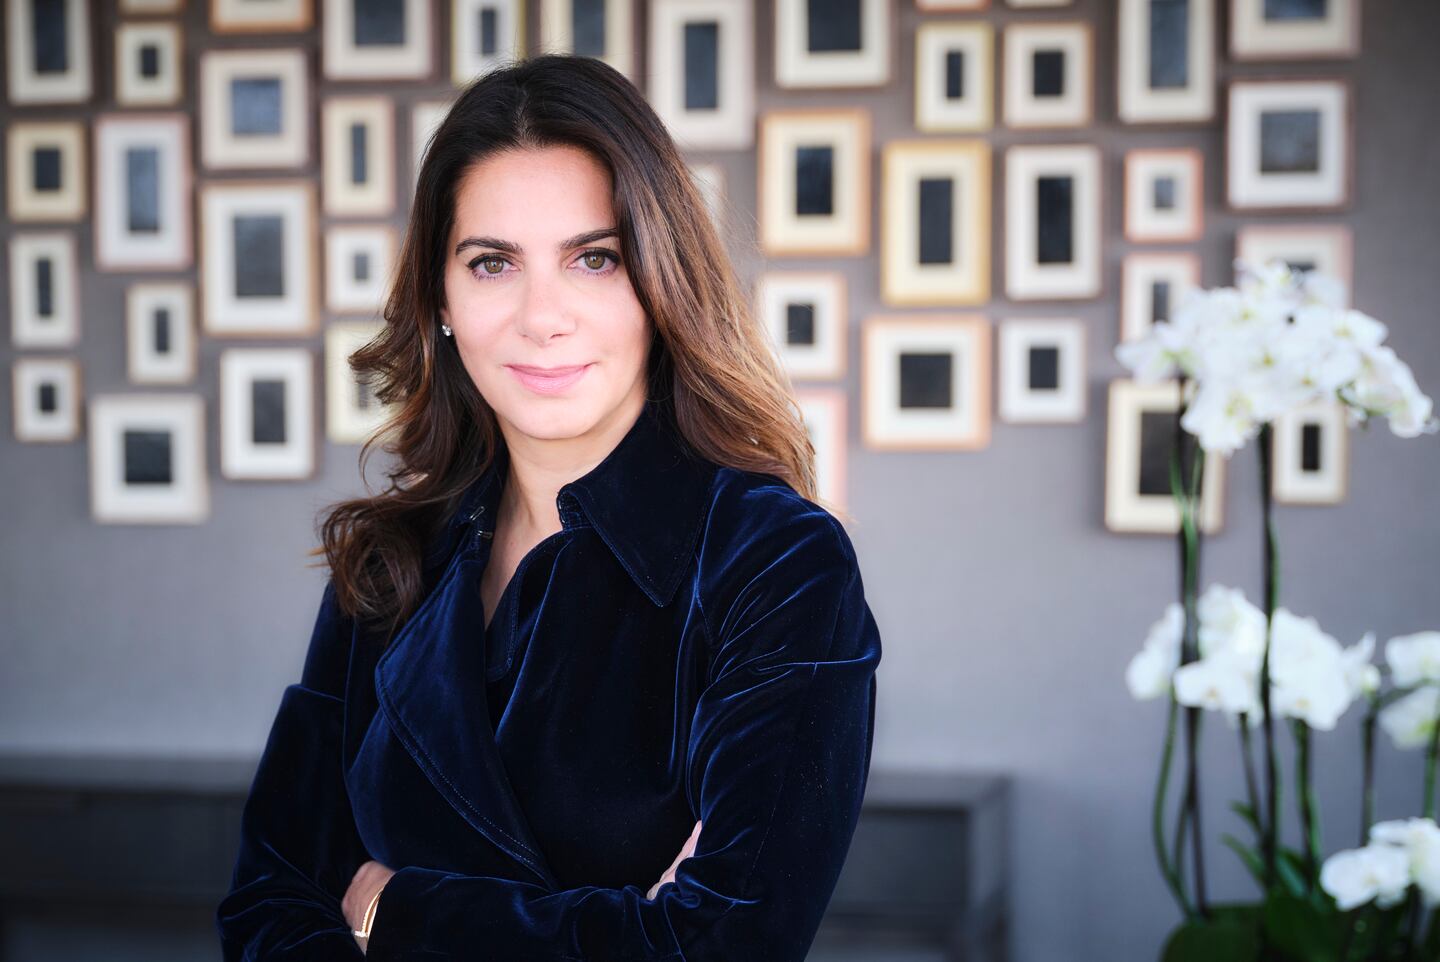 Chabi Nouri, the former Piaget CEO, is joining a private equity vehicle focused on disruptive companies in the luxury and consumer industries.